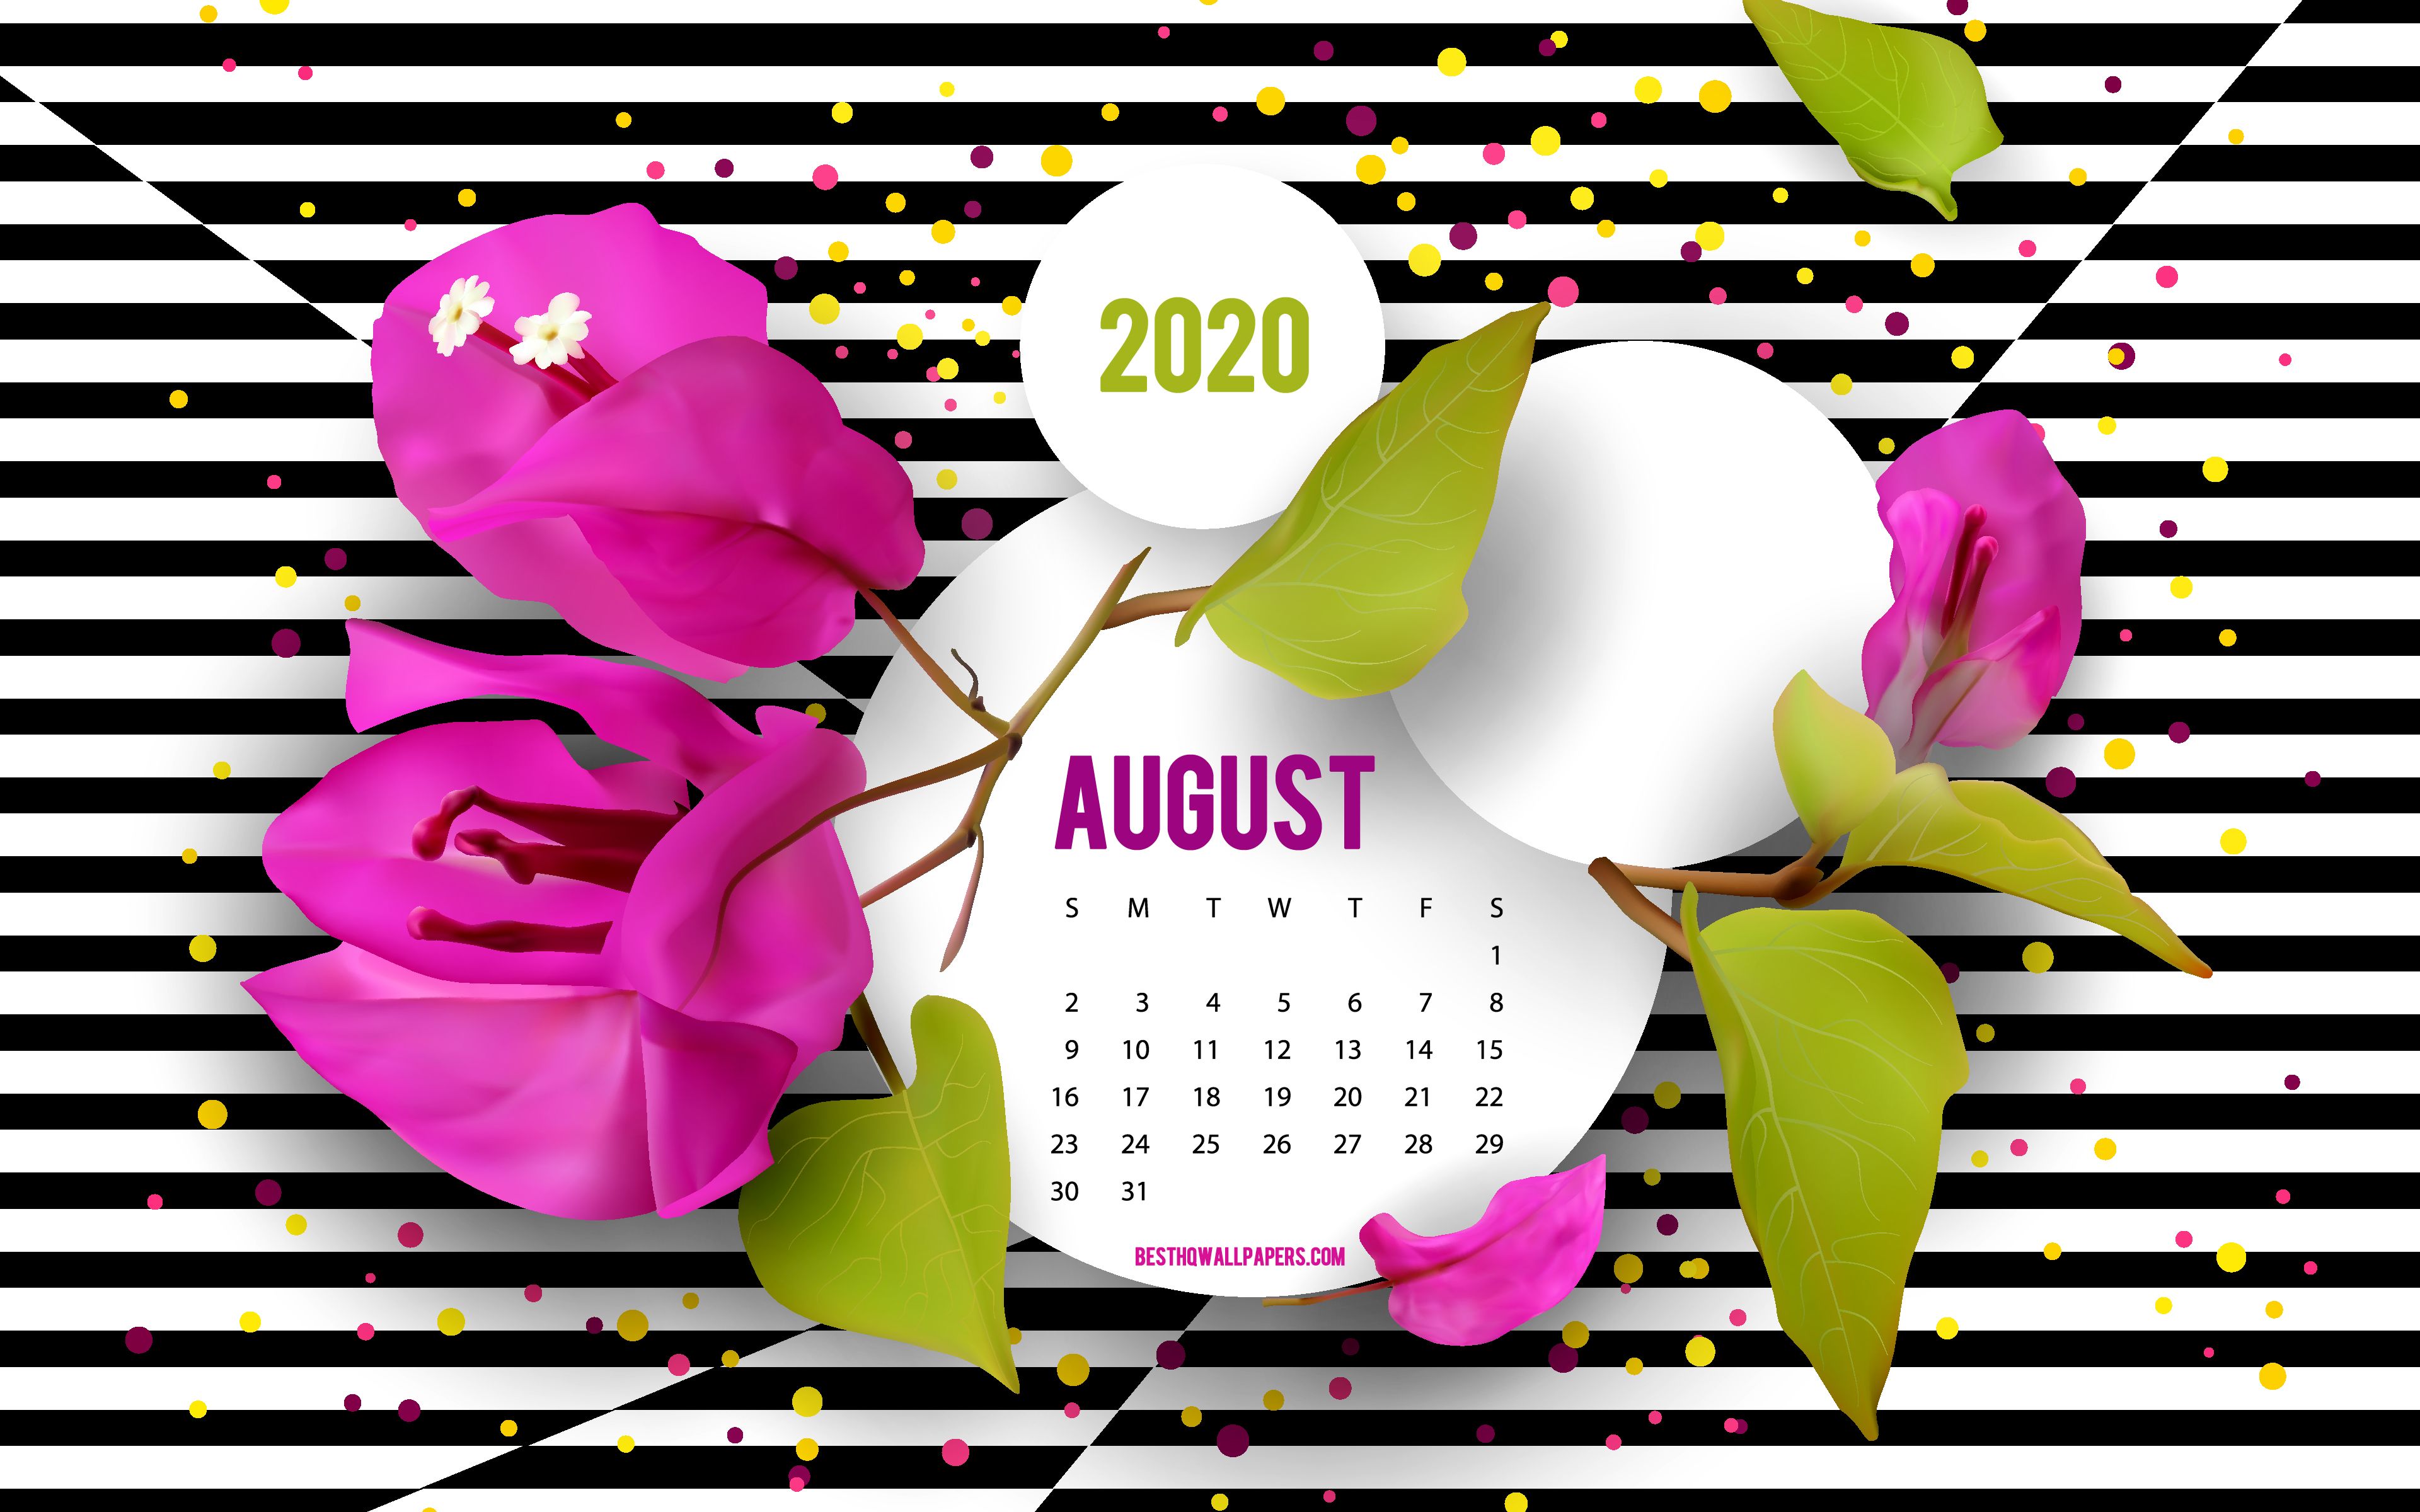 Download wallpaper 2020 August Calendar, background with flowers